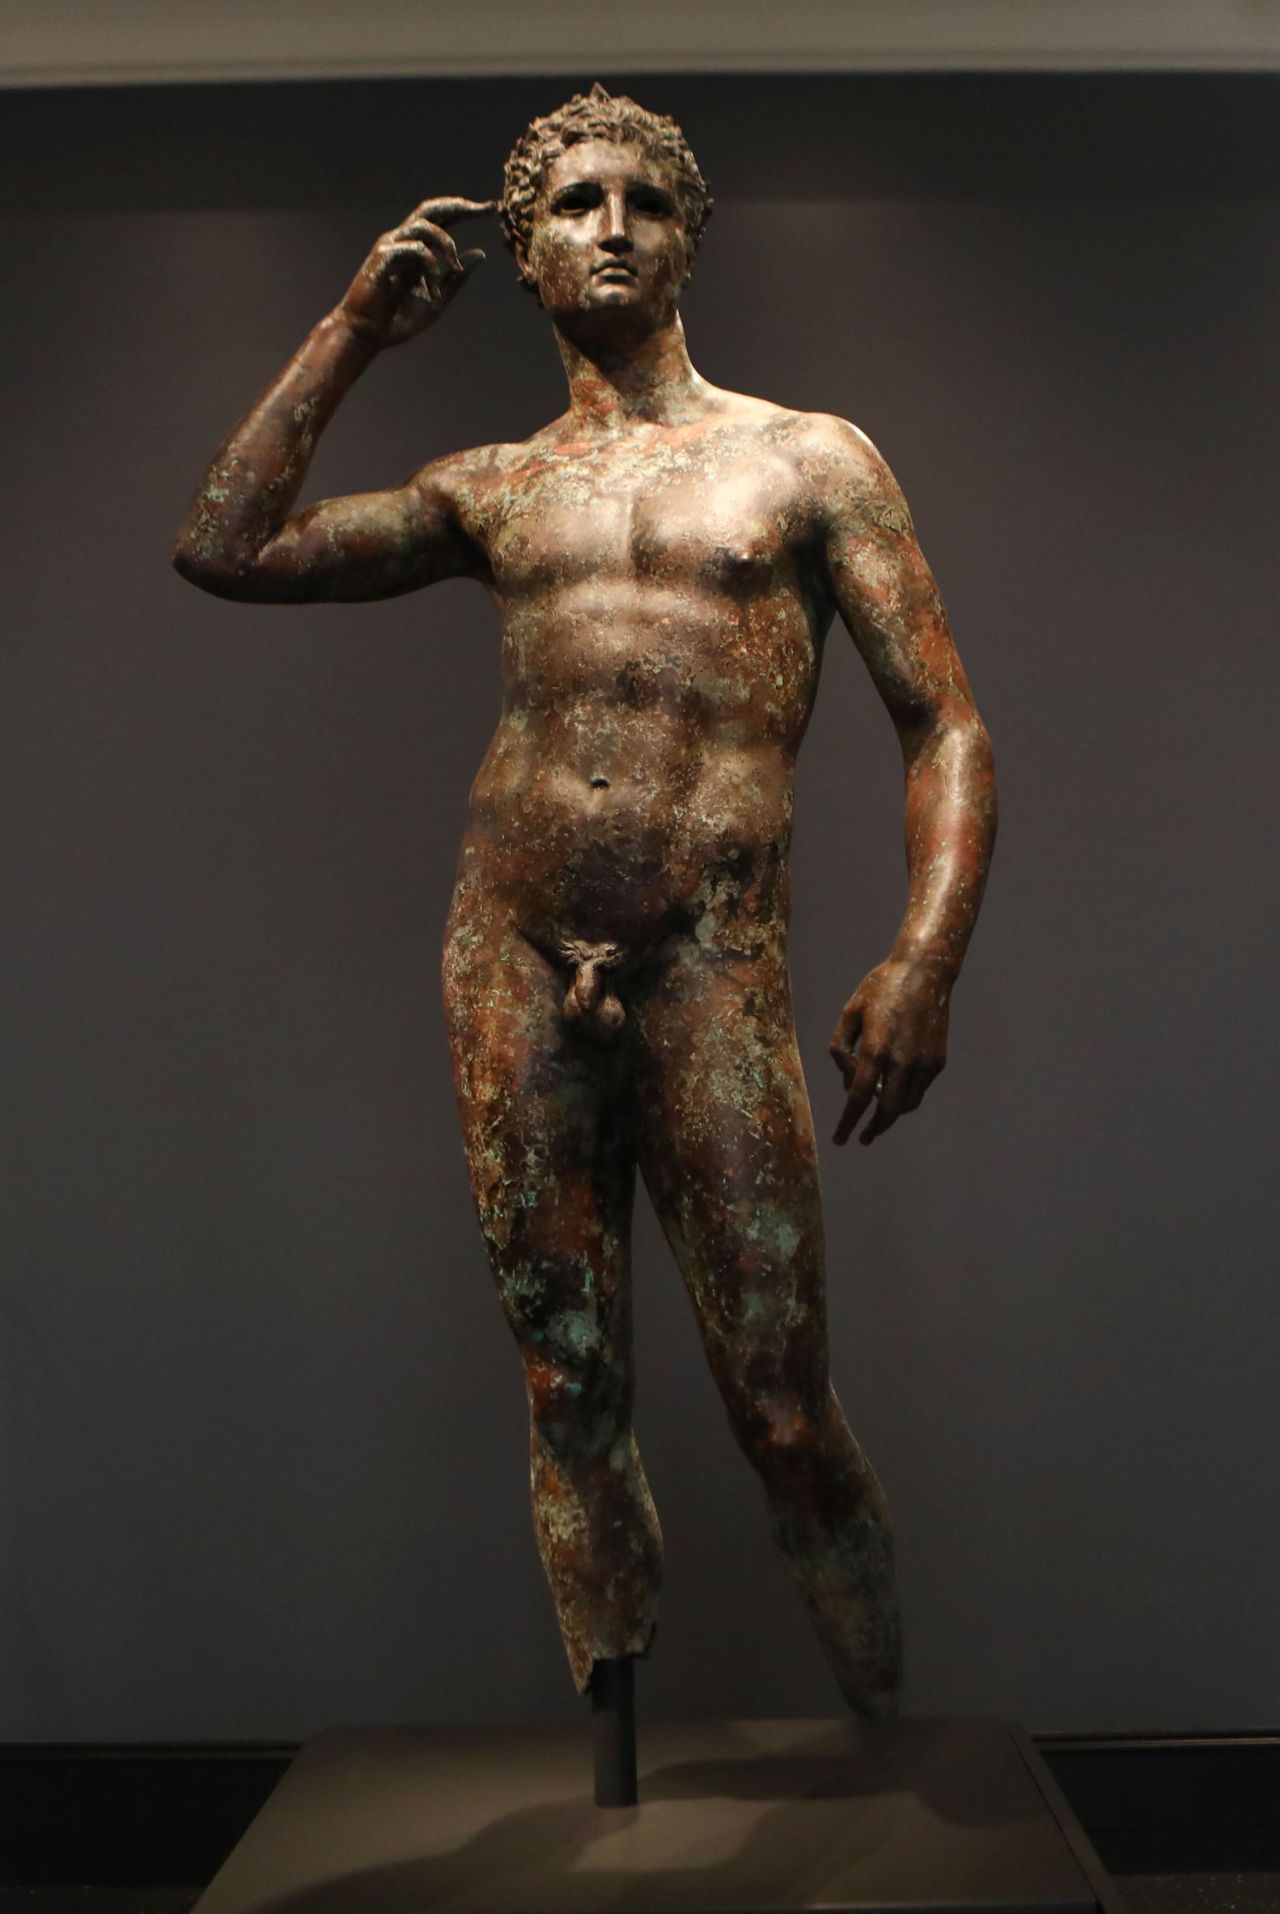 The statue known as "Victorious Youth" is displayed at the Getty Villa in December 2018.